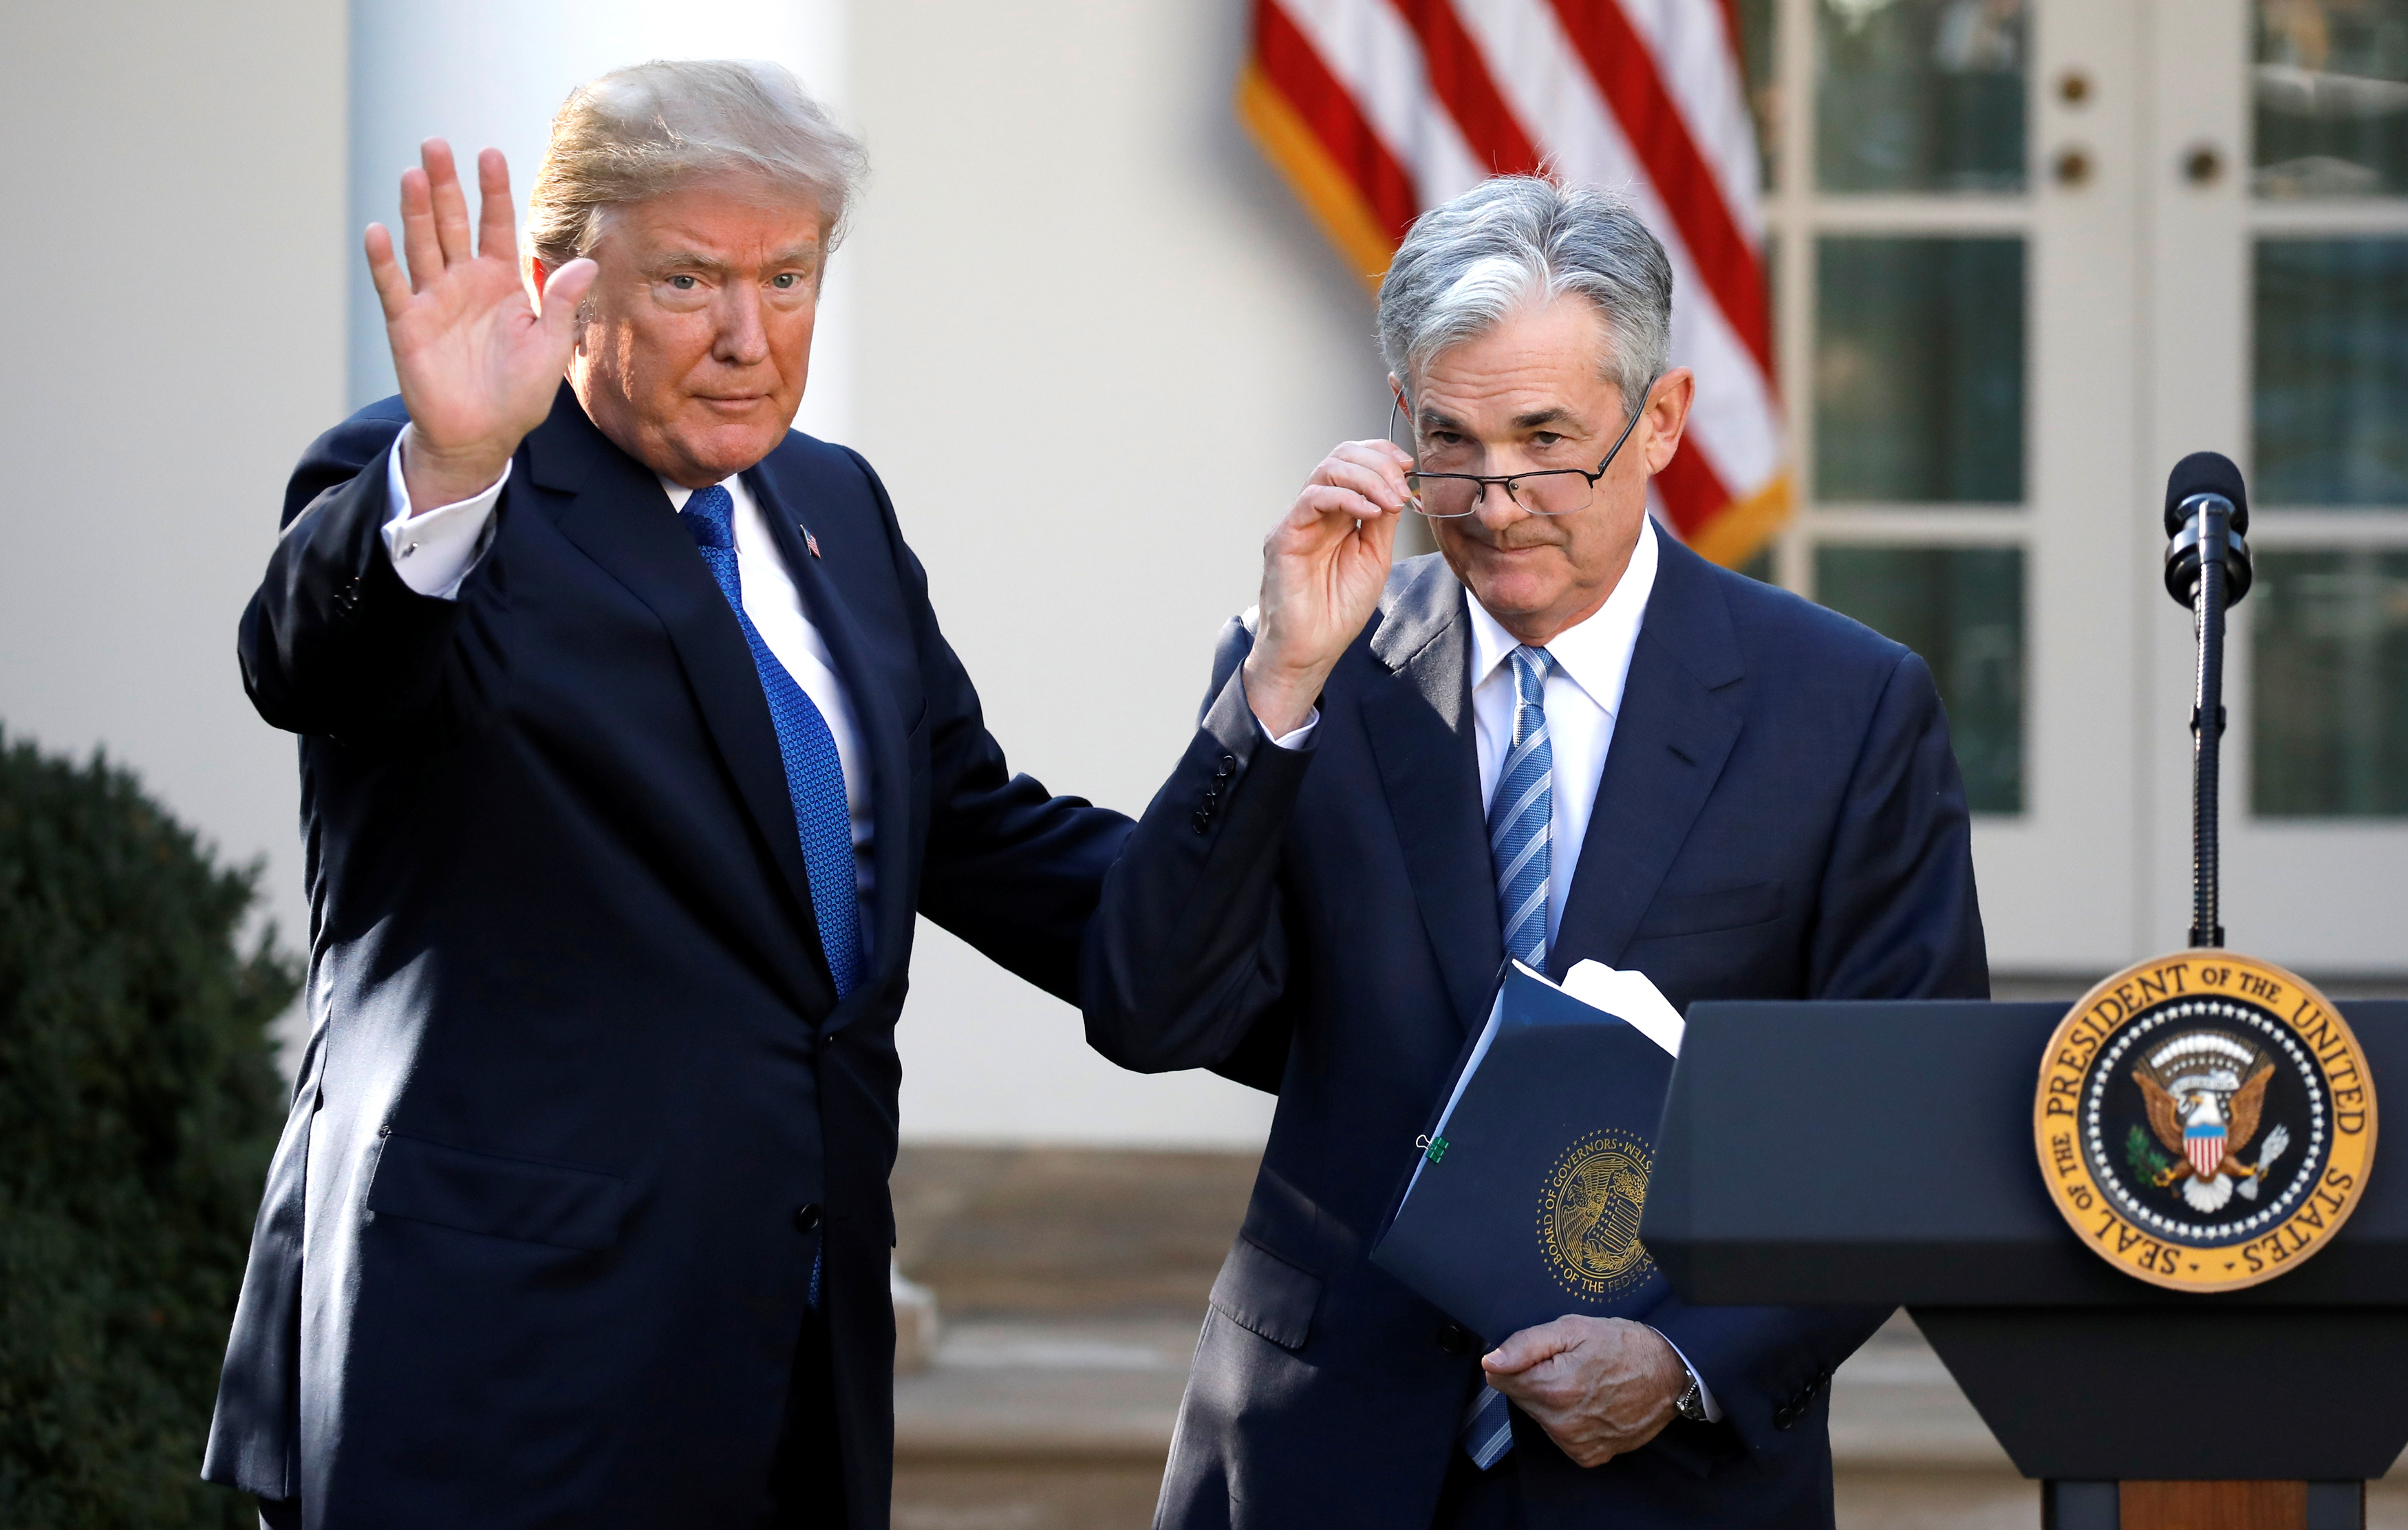 President Trump and Jerome Powell.